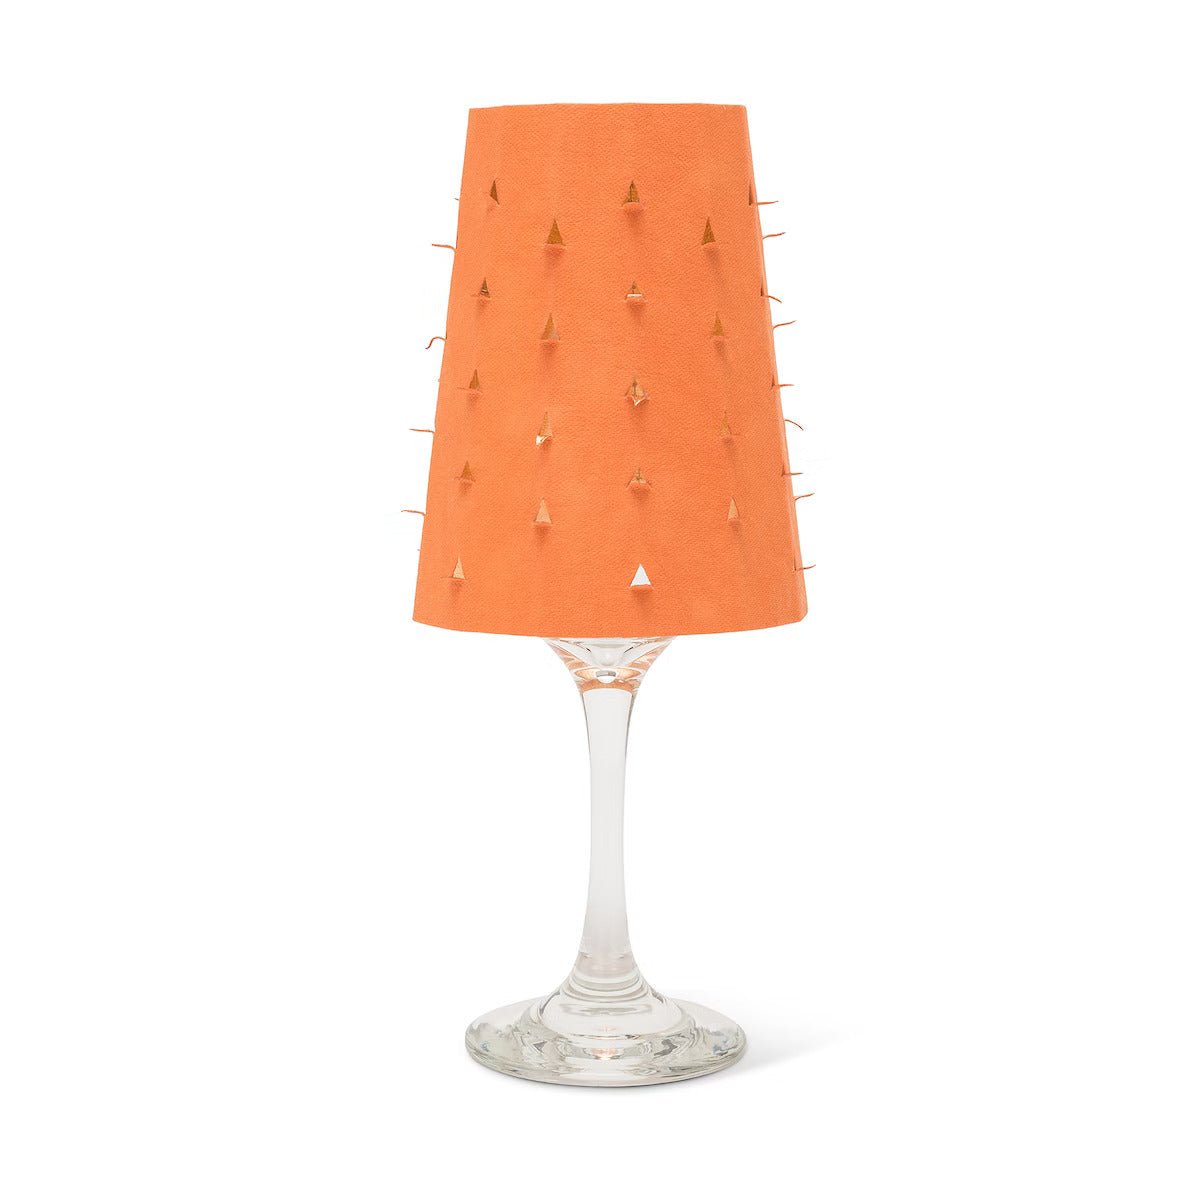 An orange washable paper lampshade with cut out details is shown sitting atop a wine glass.